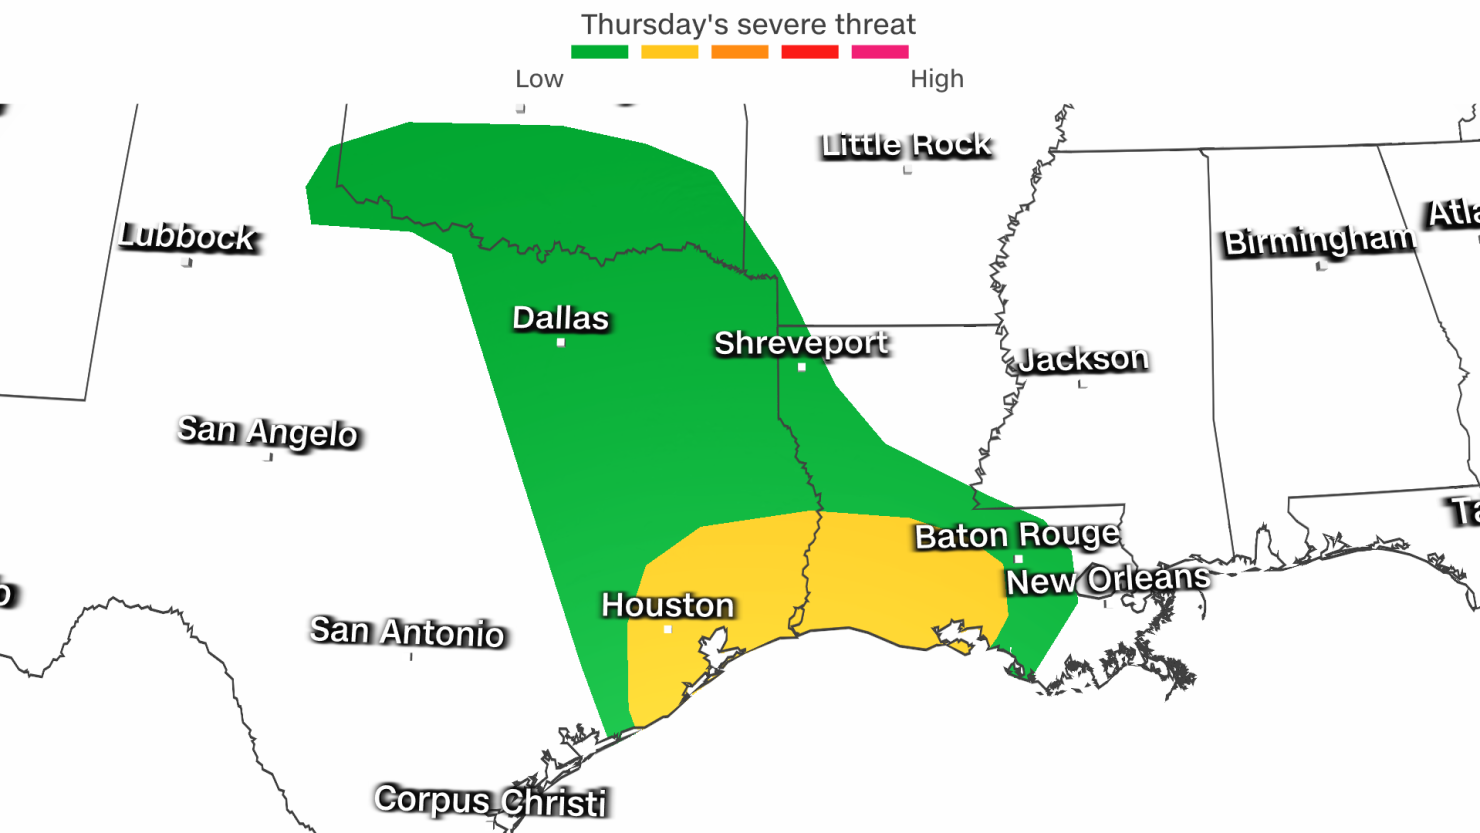 Severe thunderstorms are possible across the South on Thursday.